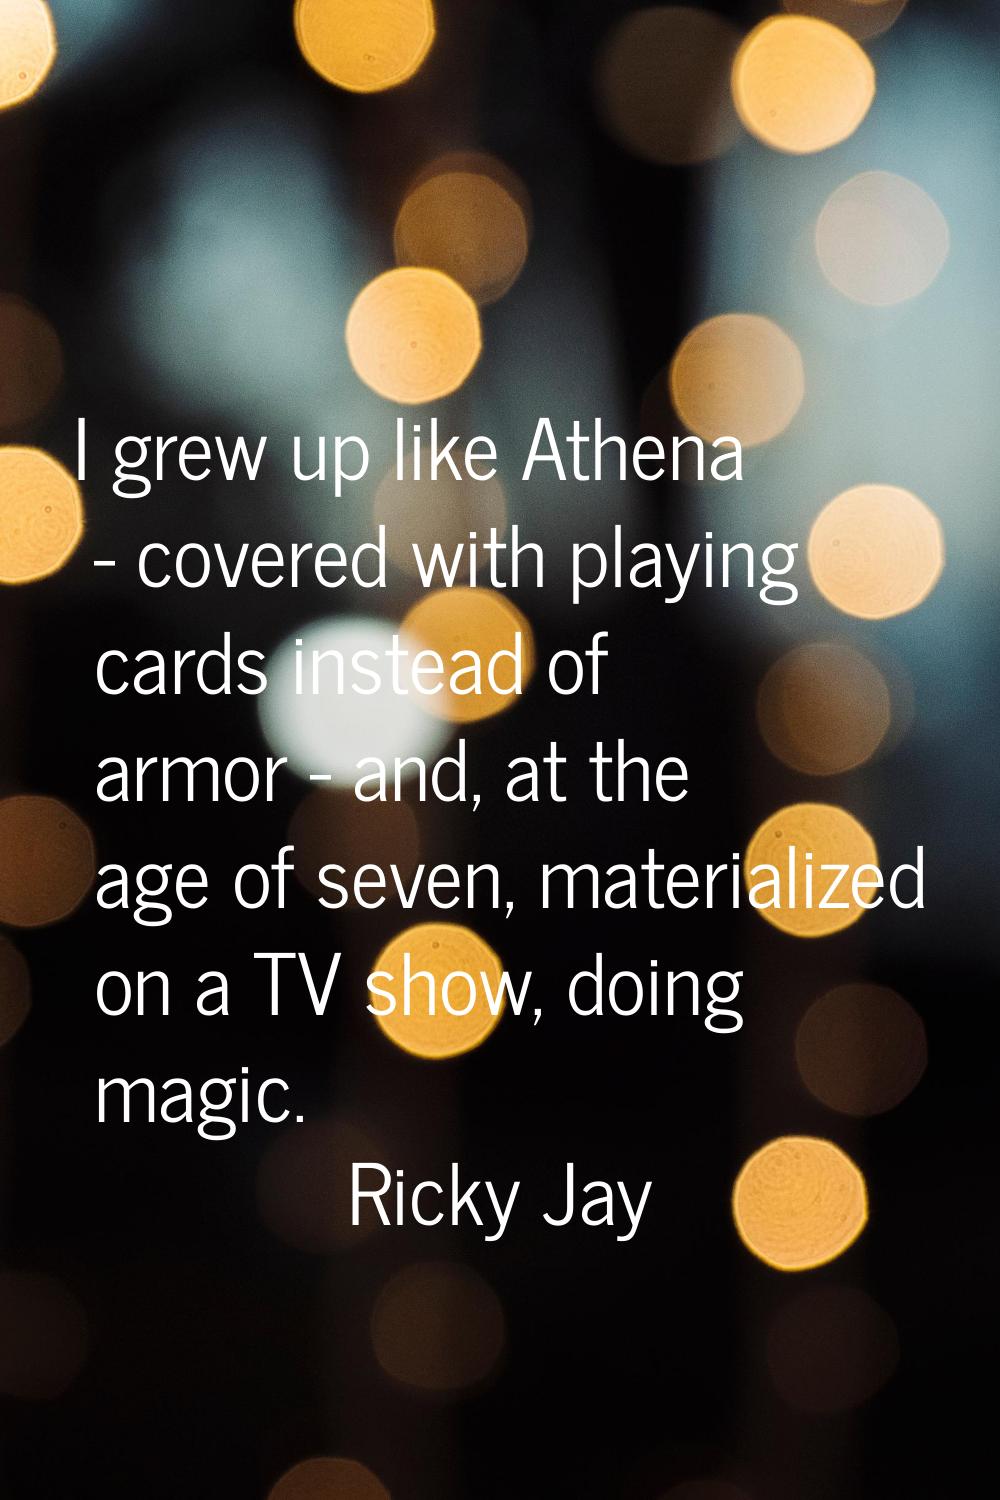 I grew up like Athena - covered with playing cards instead of armor - and, at the age of seven, mat